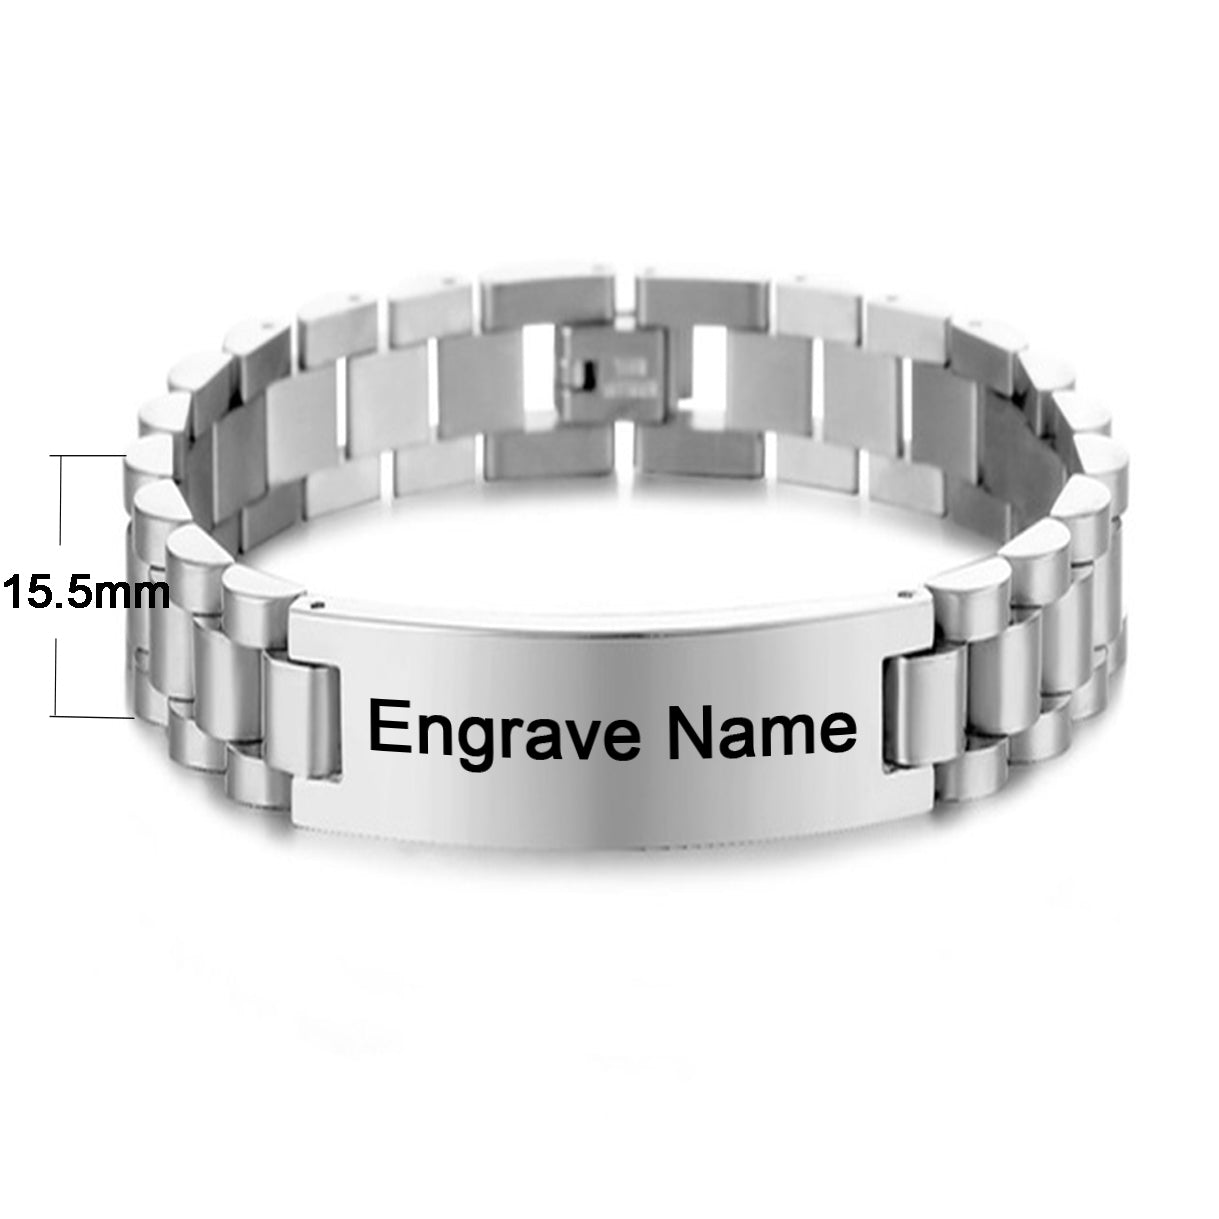 Super Quality Customizable Stainless Steel Chain Bracelets